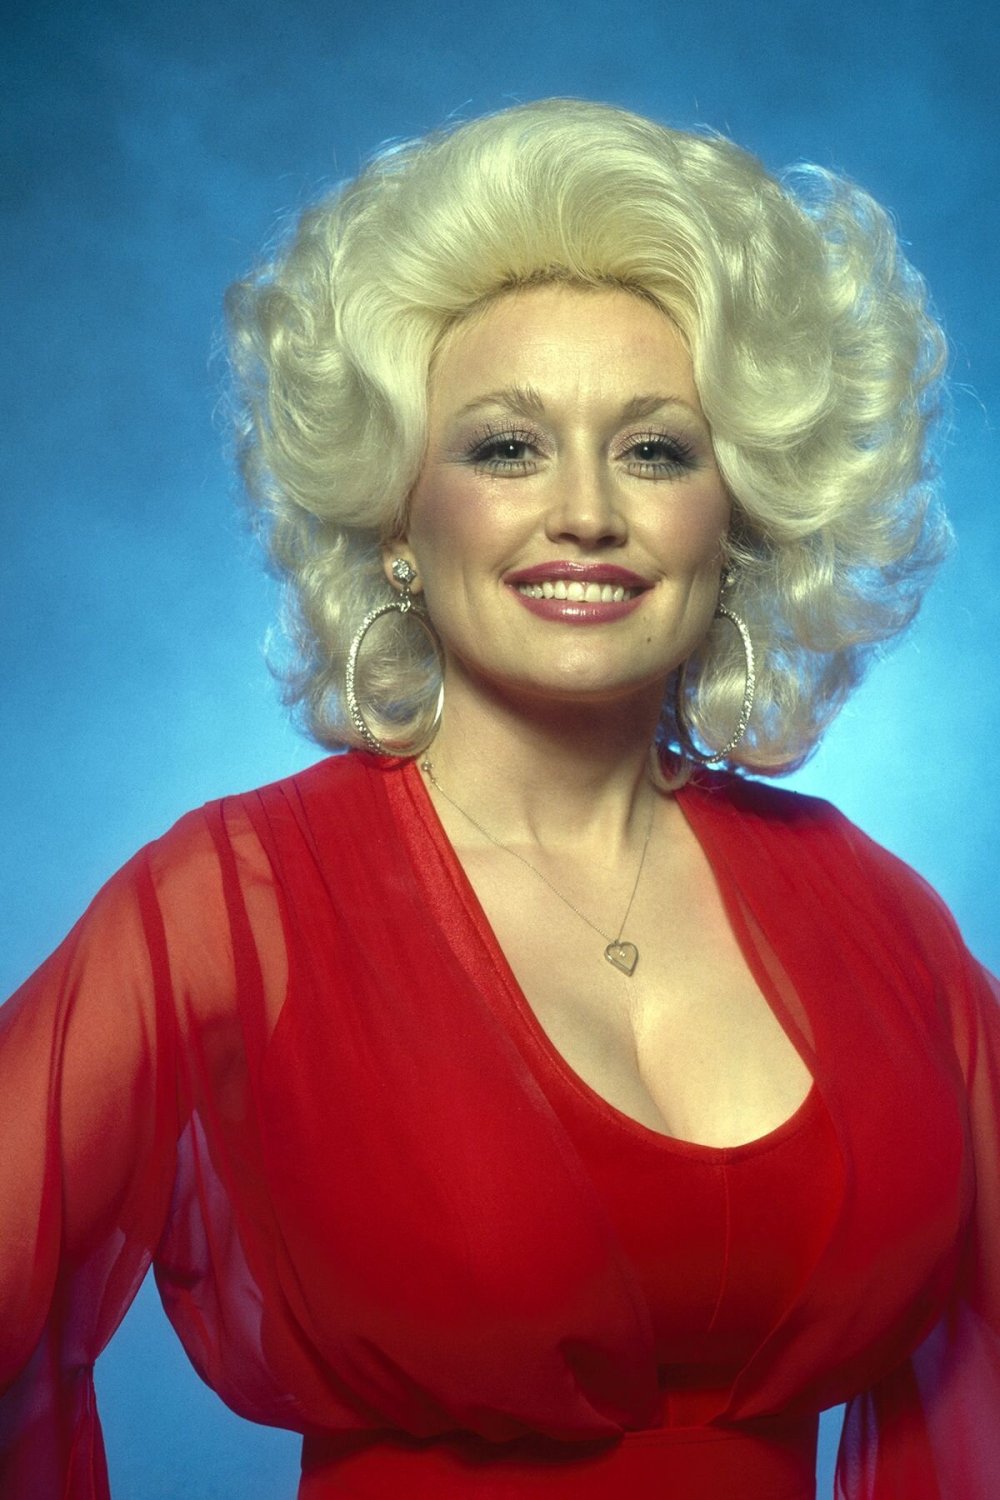 50+ Pictures Of Dolly Parton: The Great Music Legend